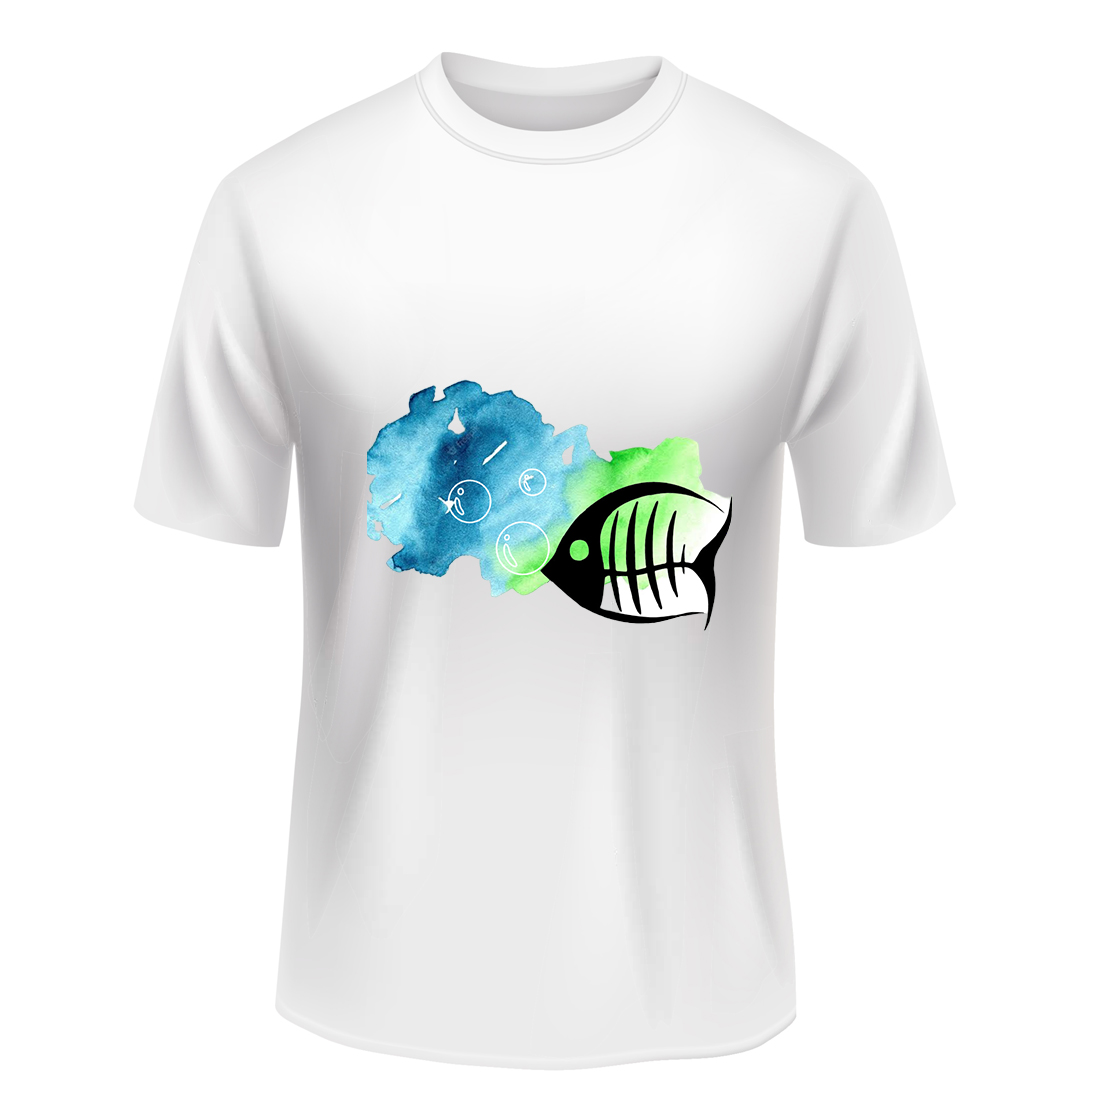 T-shirt design for printing - Fish with bubbles in the sea preview image.